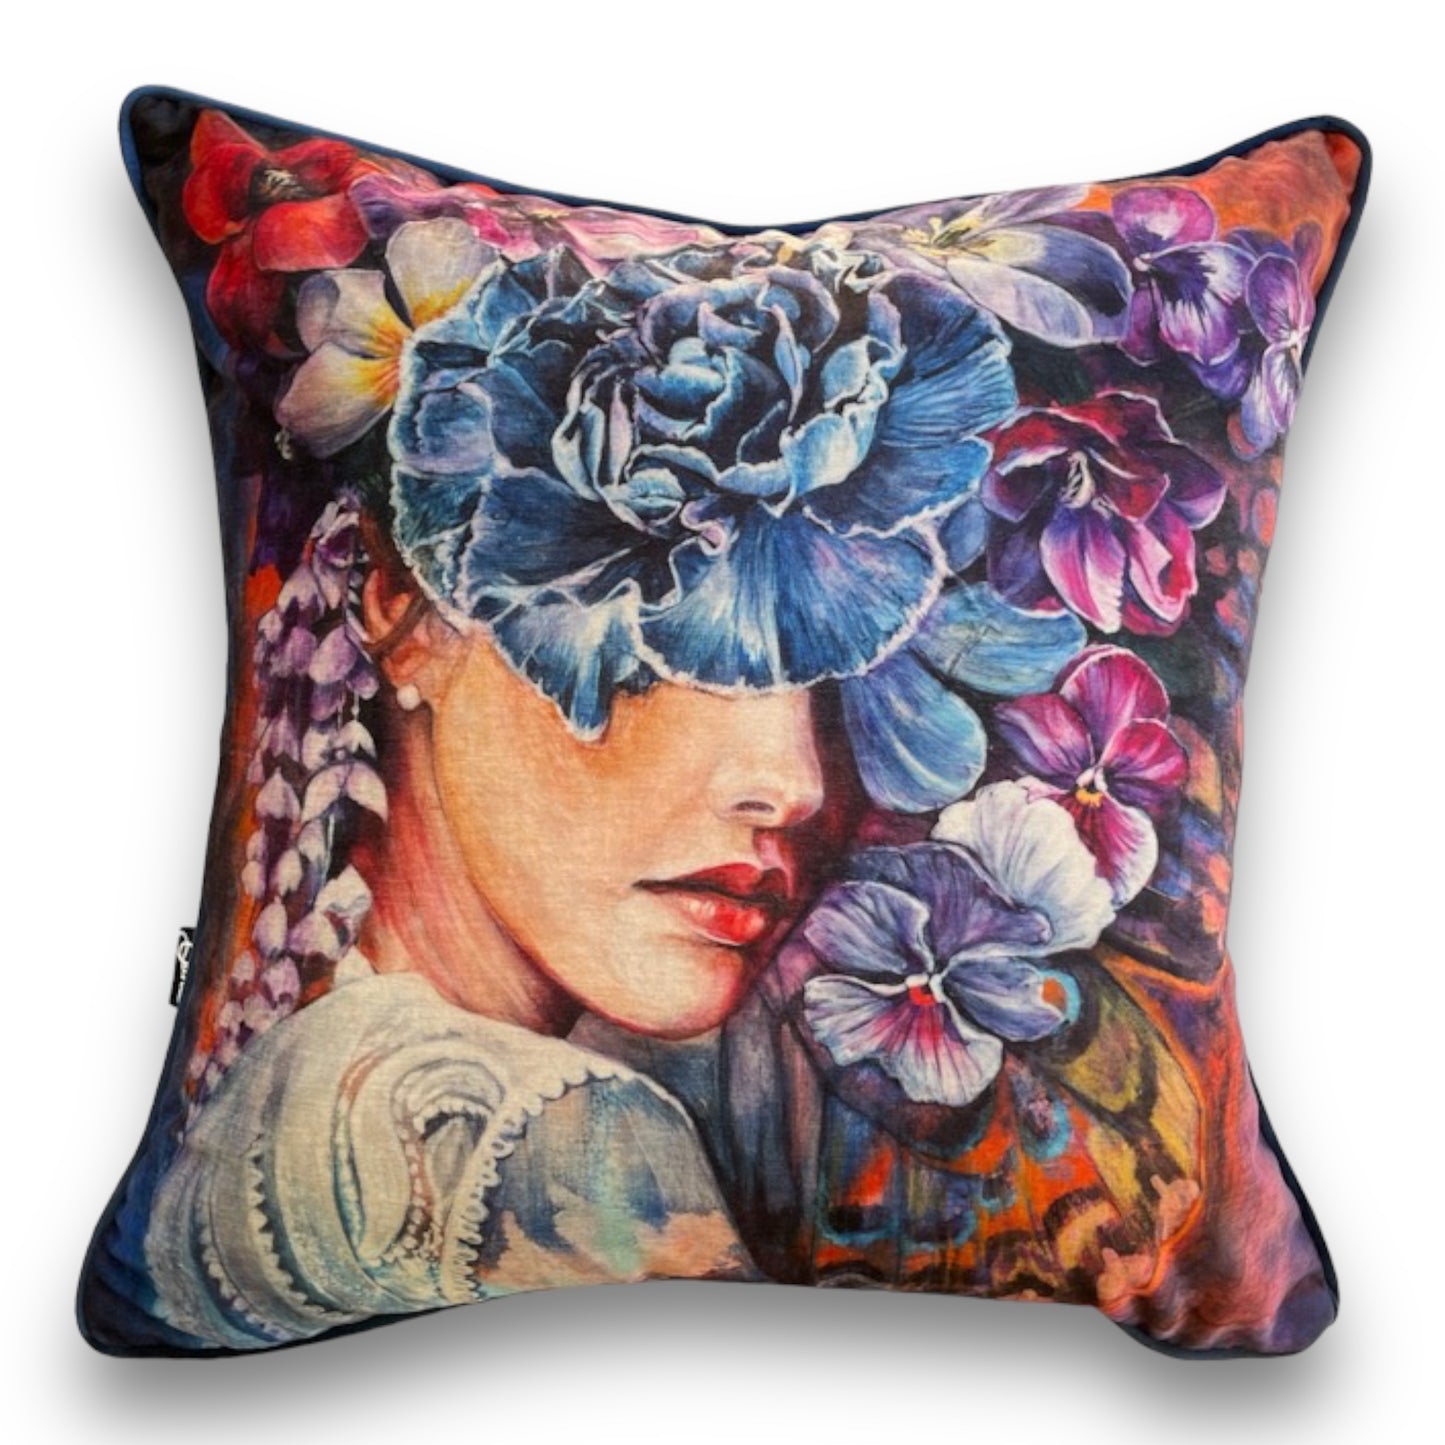 The Dreamer – scatter cushion